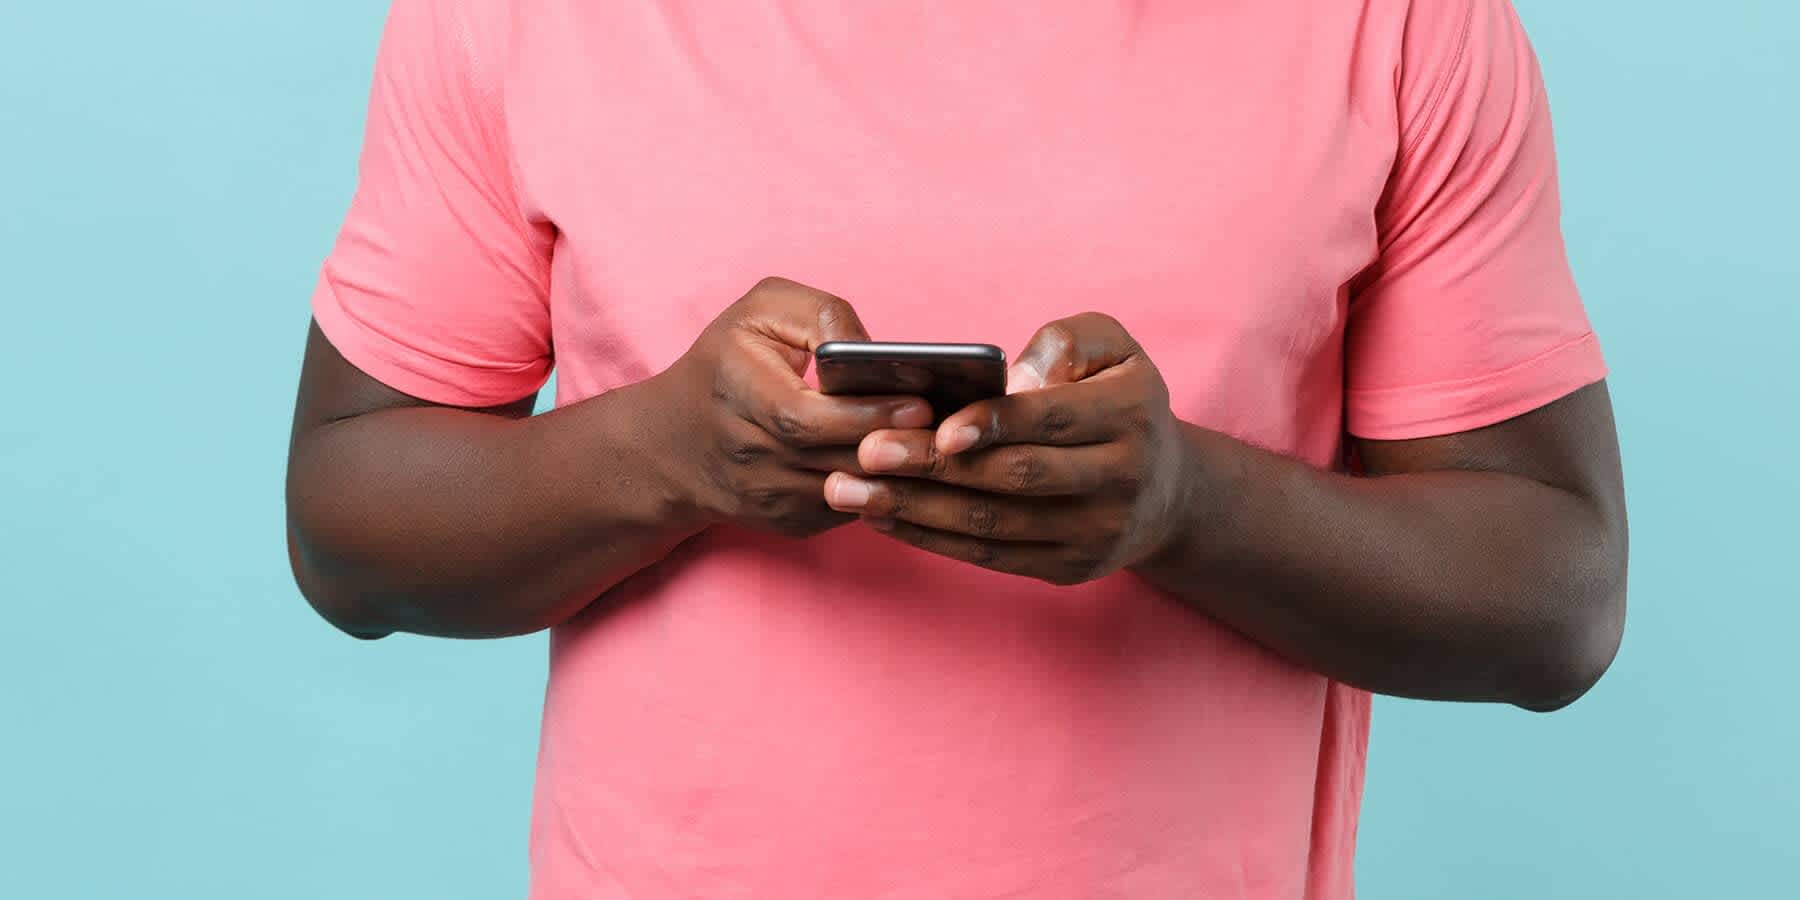 Man in pink shirt using mobile phone to look up if showering after sex reduces chances of STDs